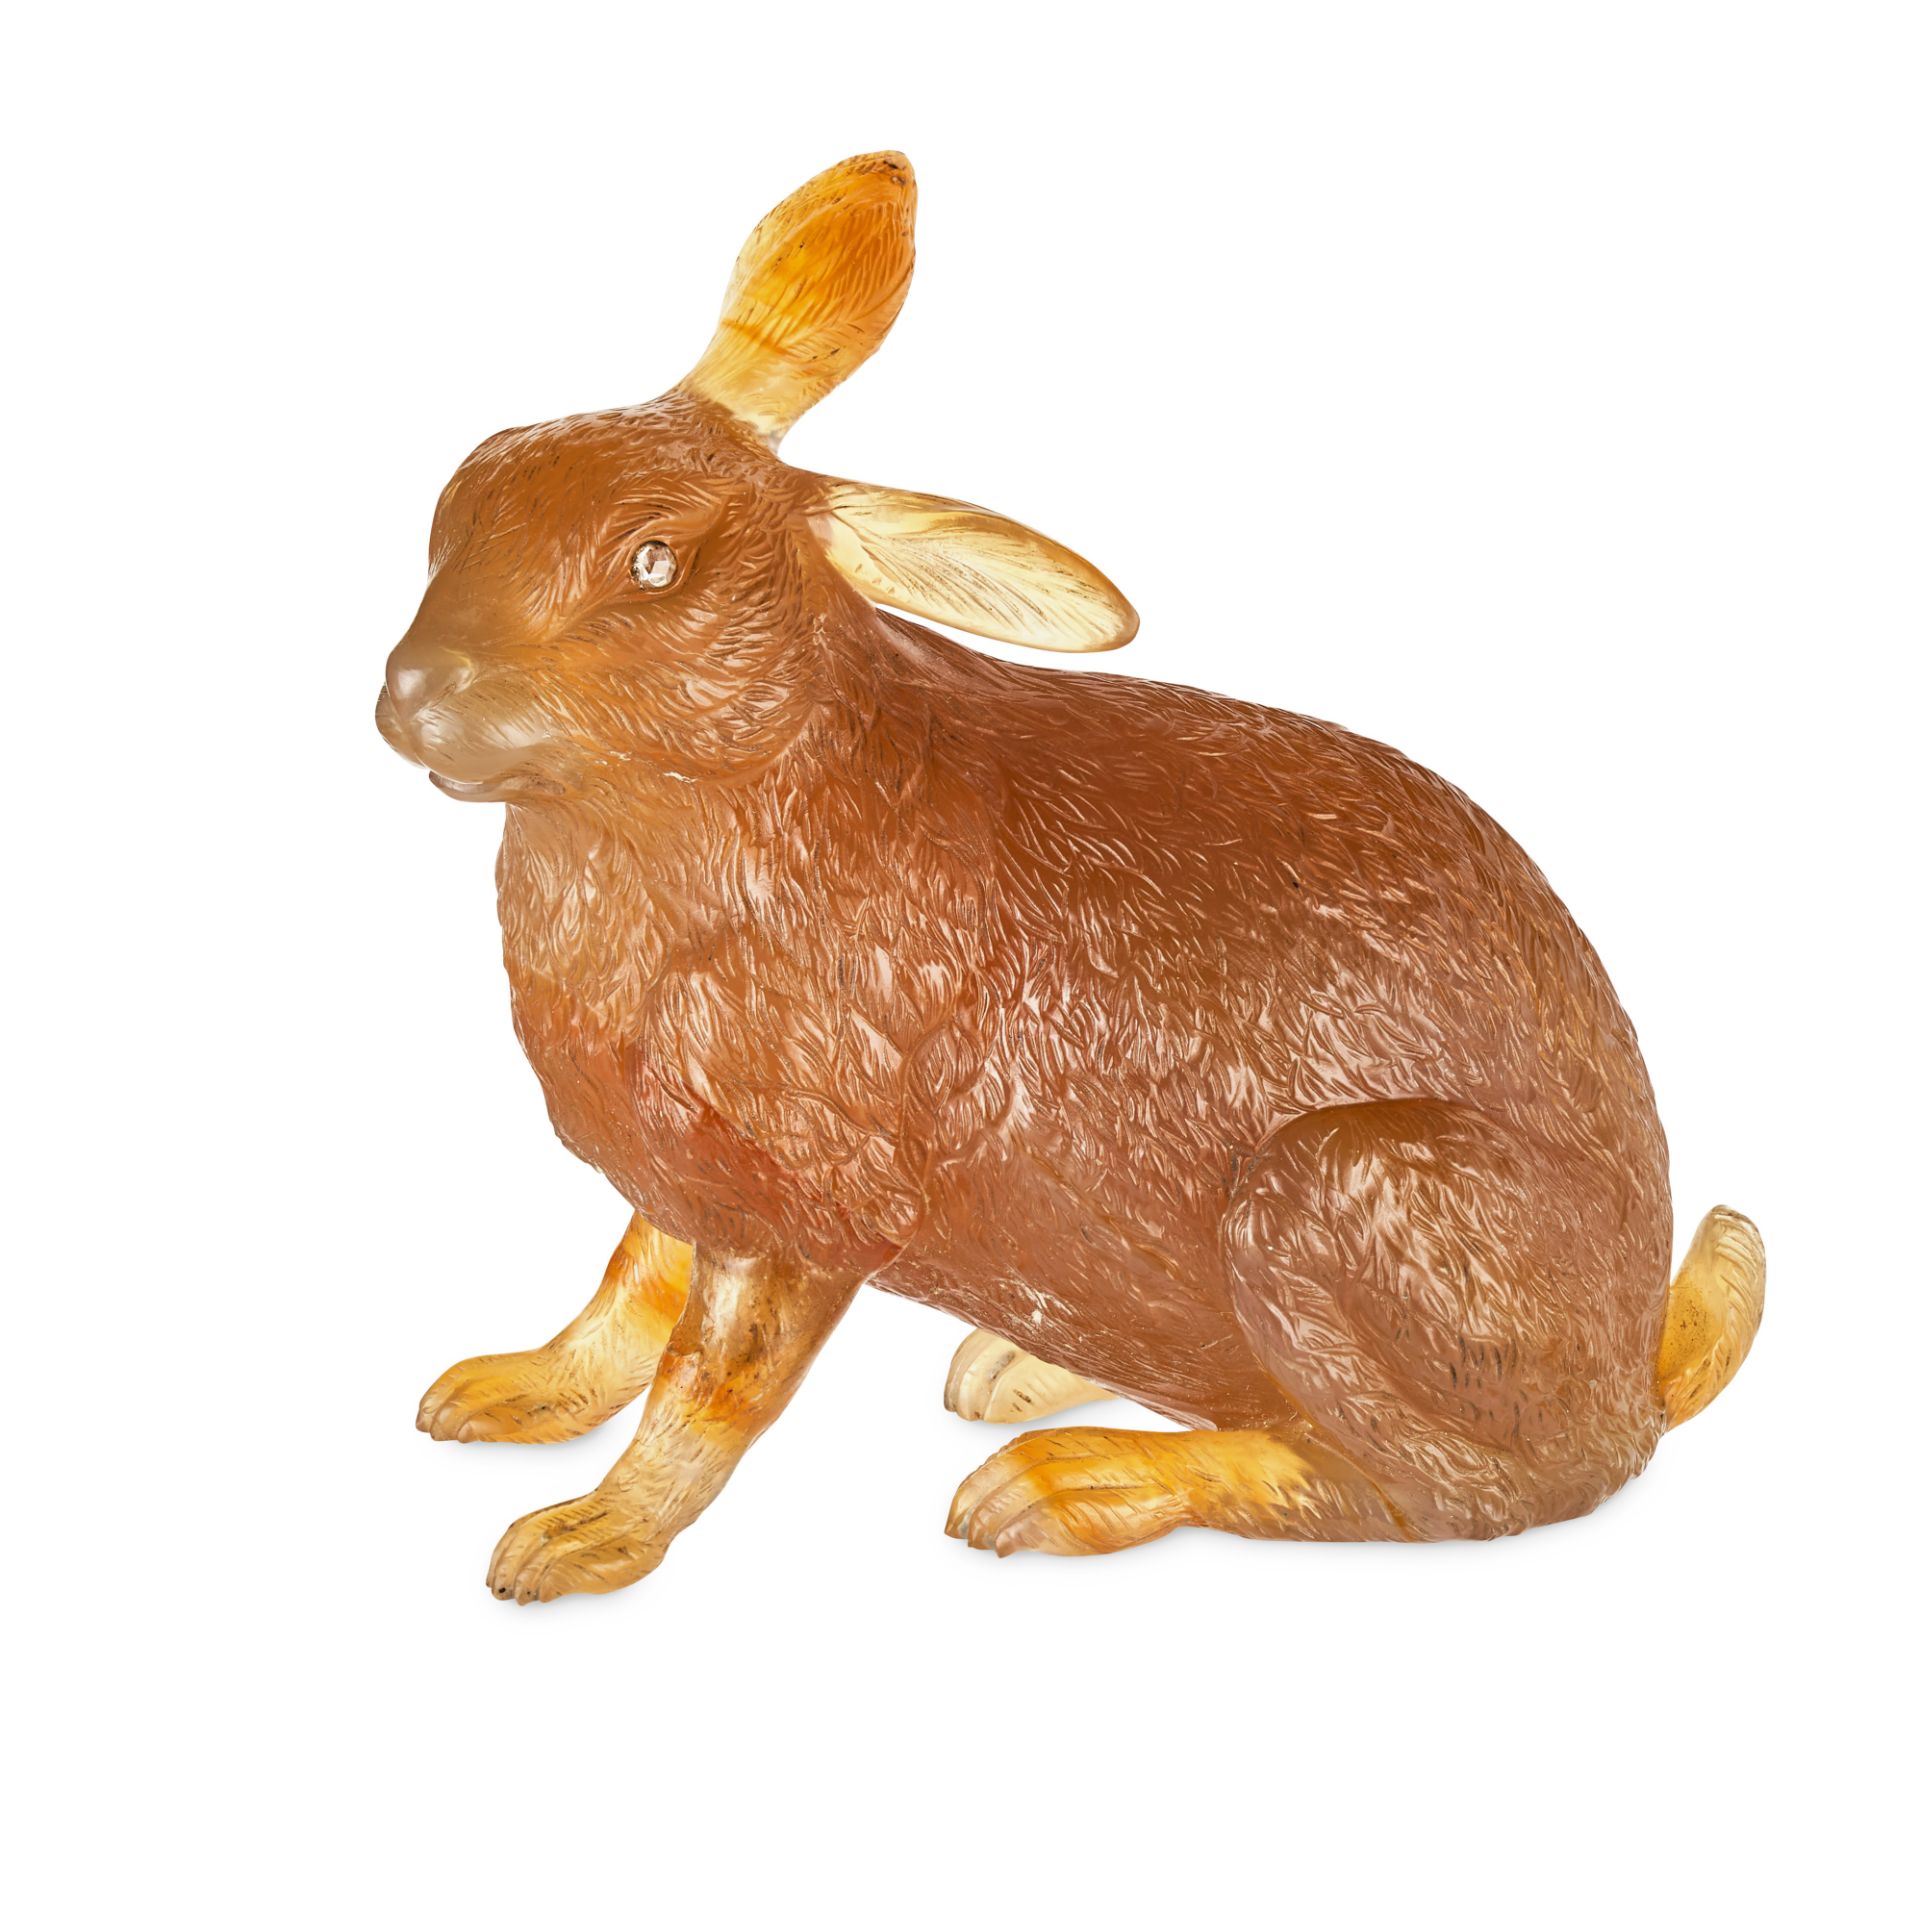 FABERGE, A JEWELLED AGATE FIGURE OF A HARE / LEVERETT, ST PETERSBURG, CIRCA 1900 - Image 2 of 10